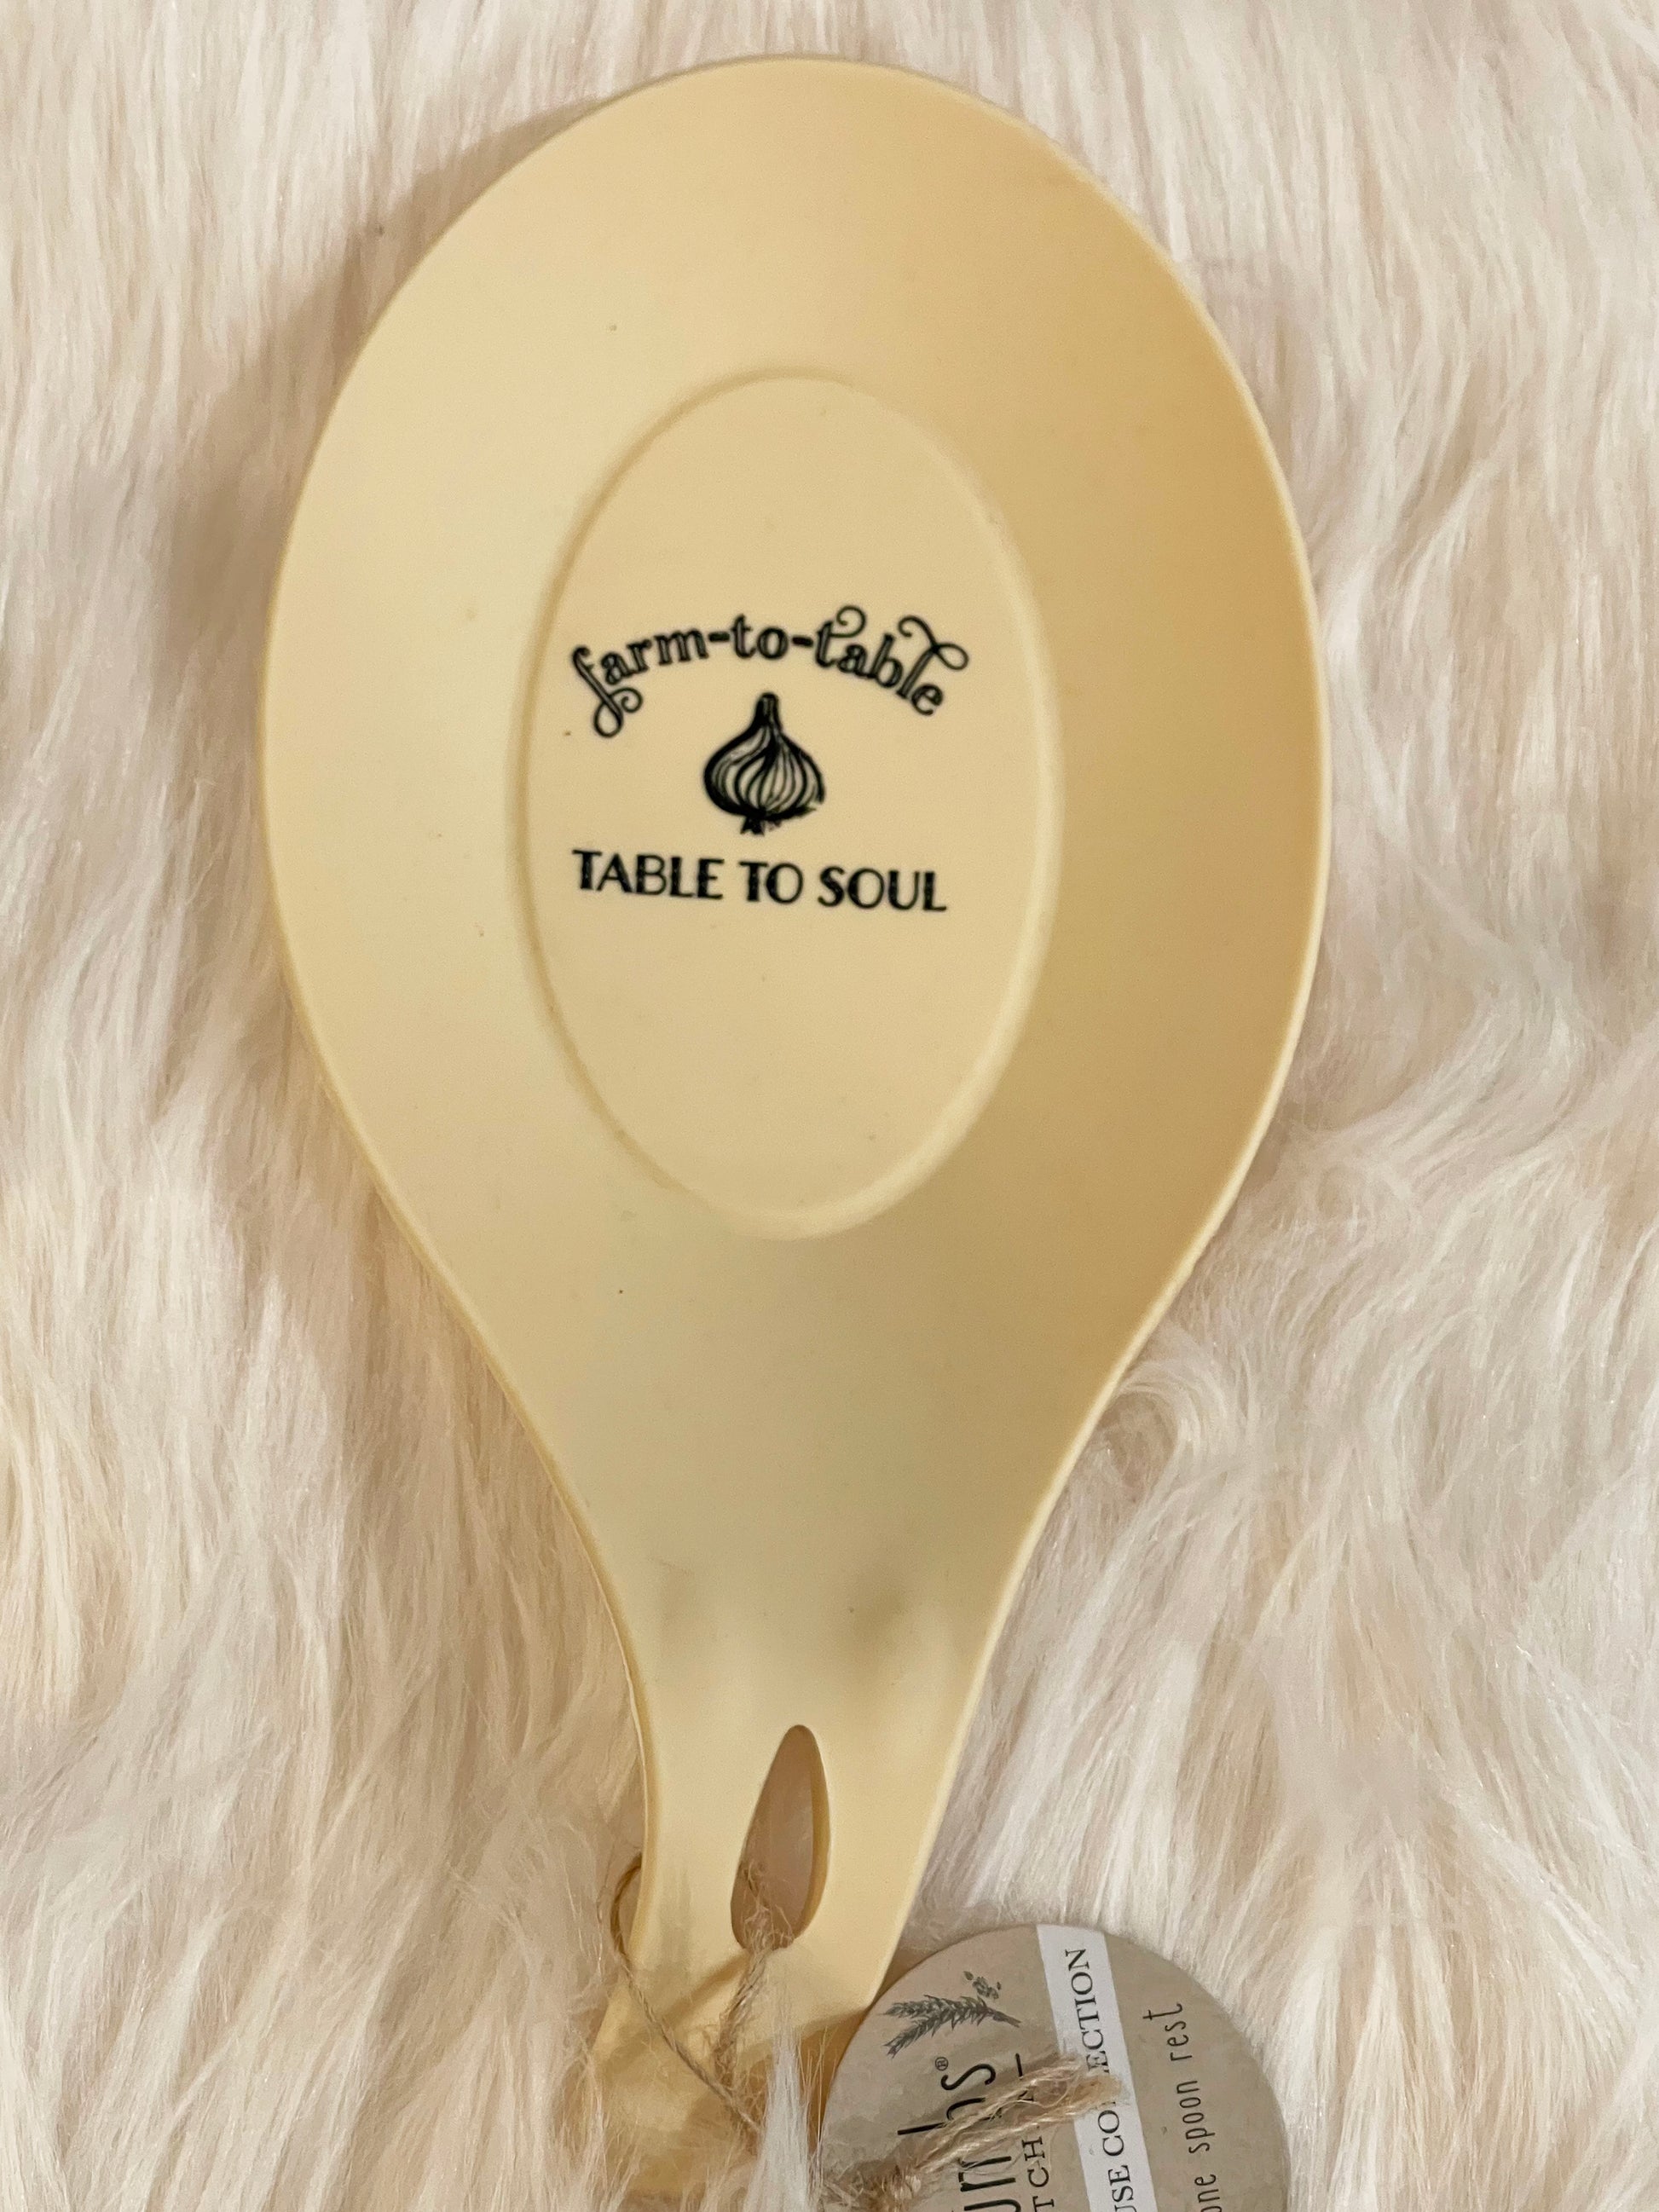 A great gift idea or get them for yourself! By Krumbs, from the Farmhouse Collection, these silicone spoonrests are adorned with inspirational sayings, and are super practical with their flexible structure... no-mess cooking, easy to clean! Generous size, holds tongs to ladles and more! Heat resistant silicone ensures safe use. A must-have for every kitchen!